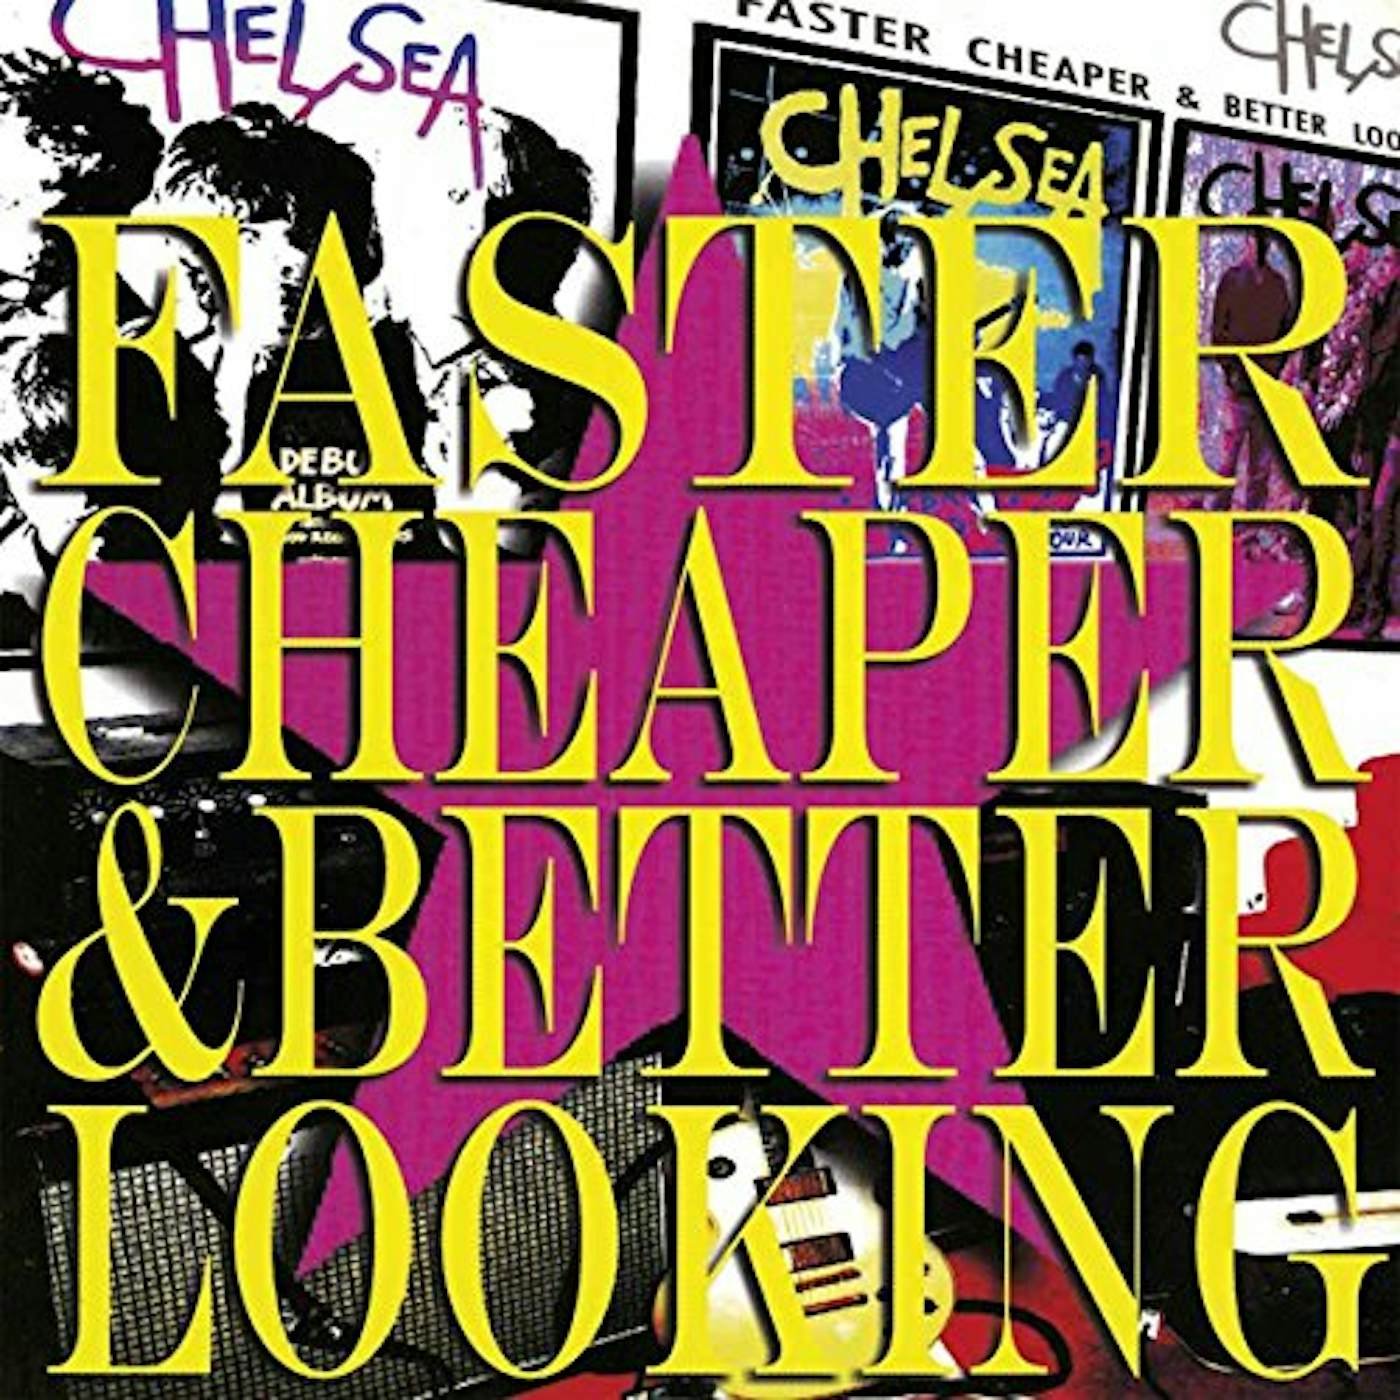 Chelsea FASTER CHEAPER BETTER LOOKING Vinyl Record